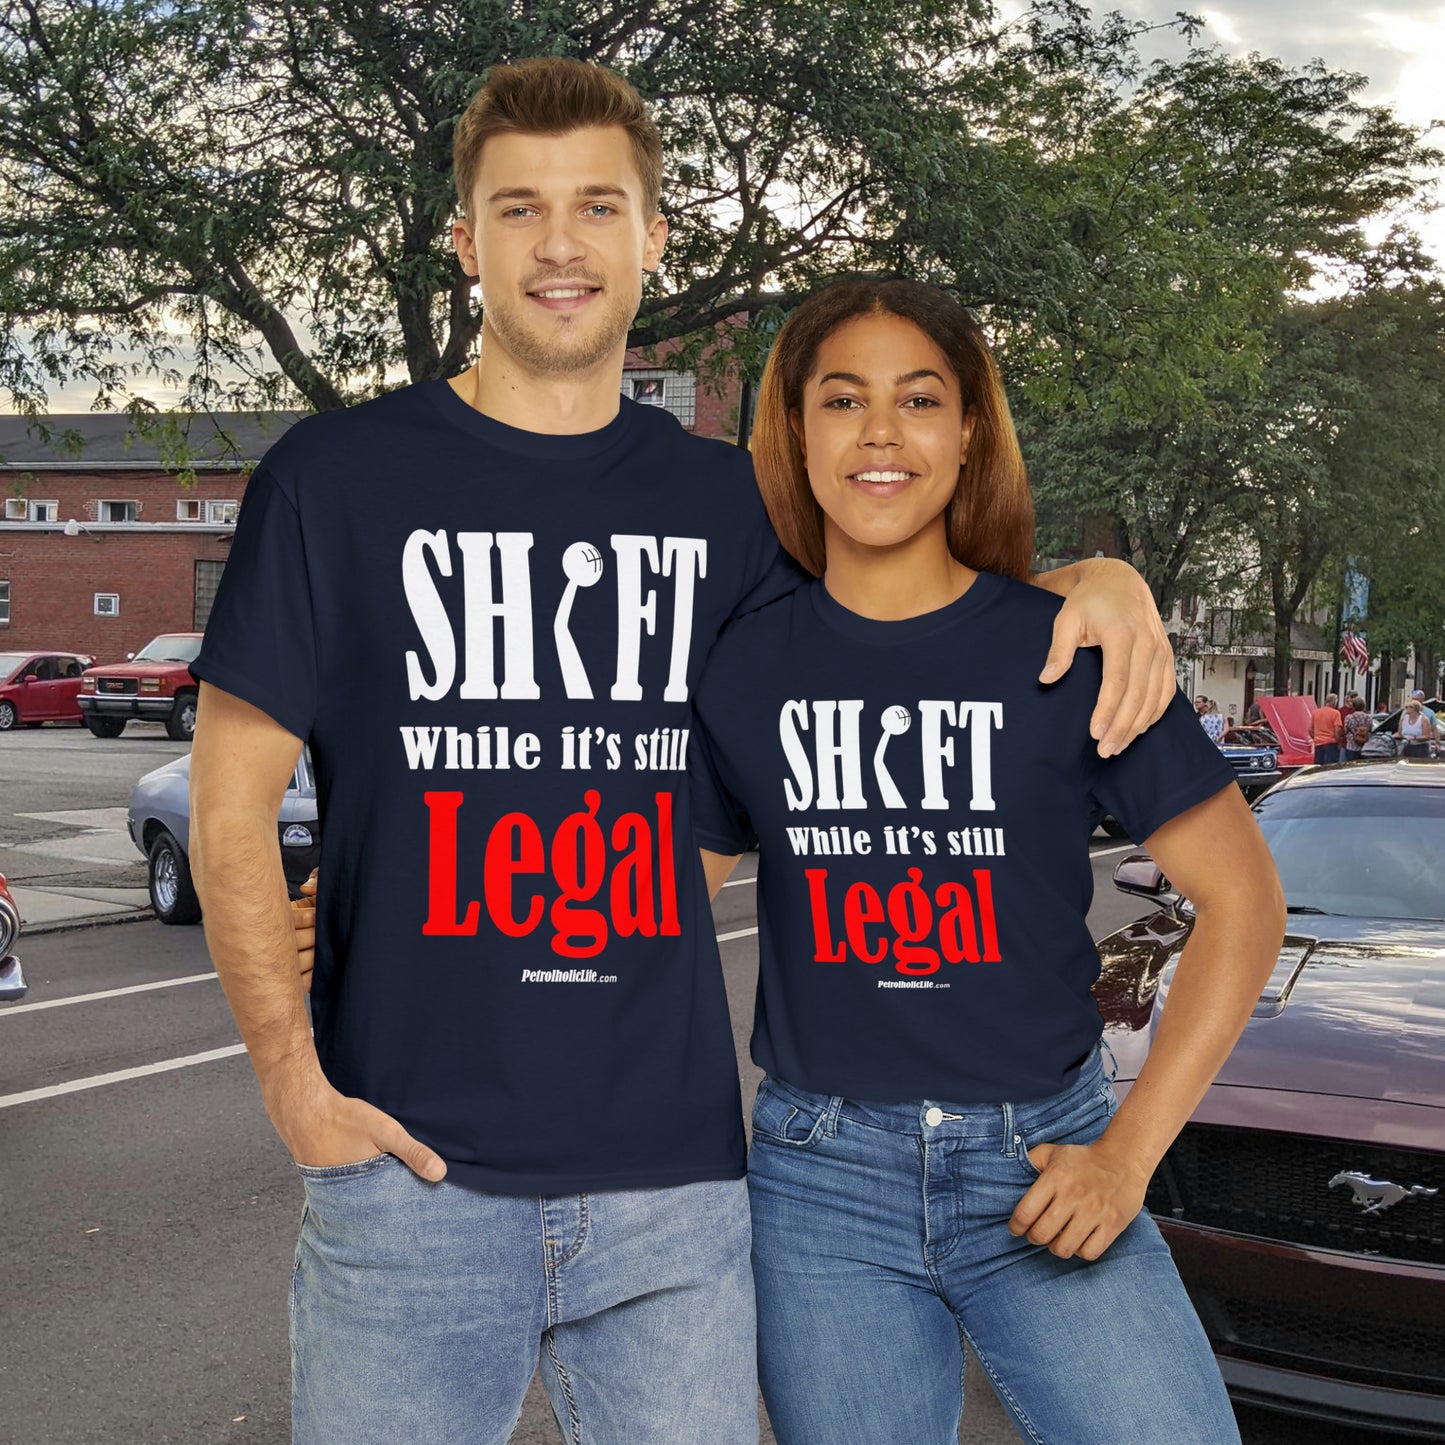 Shift While Still Legal -  Unisex Heavy Cotton Tee